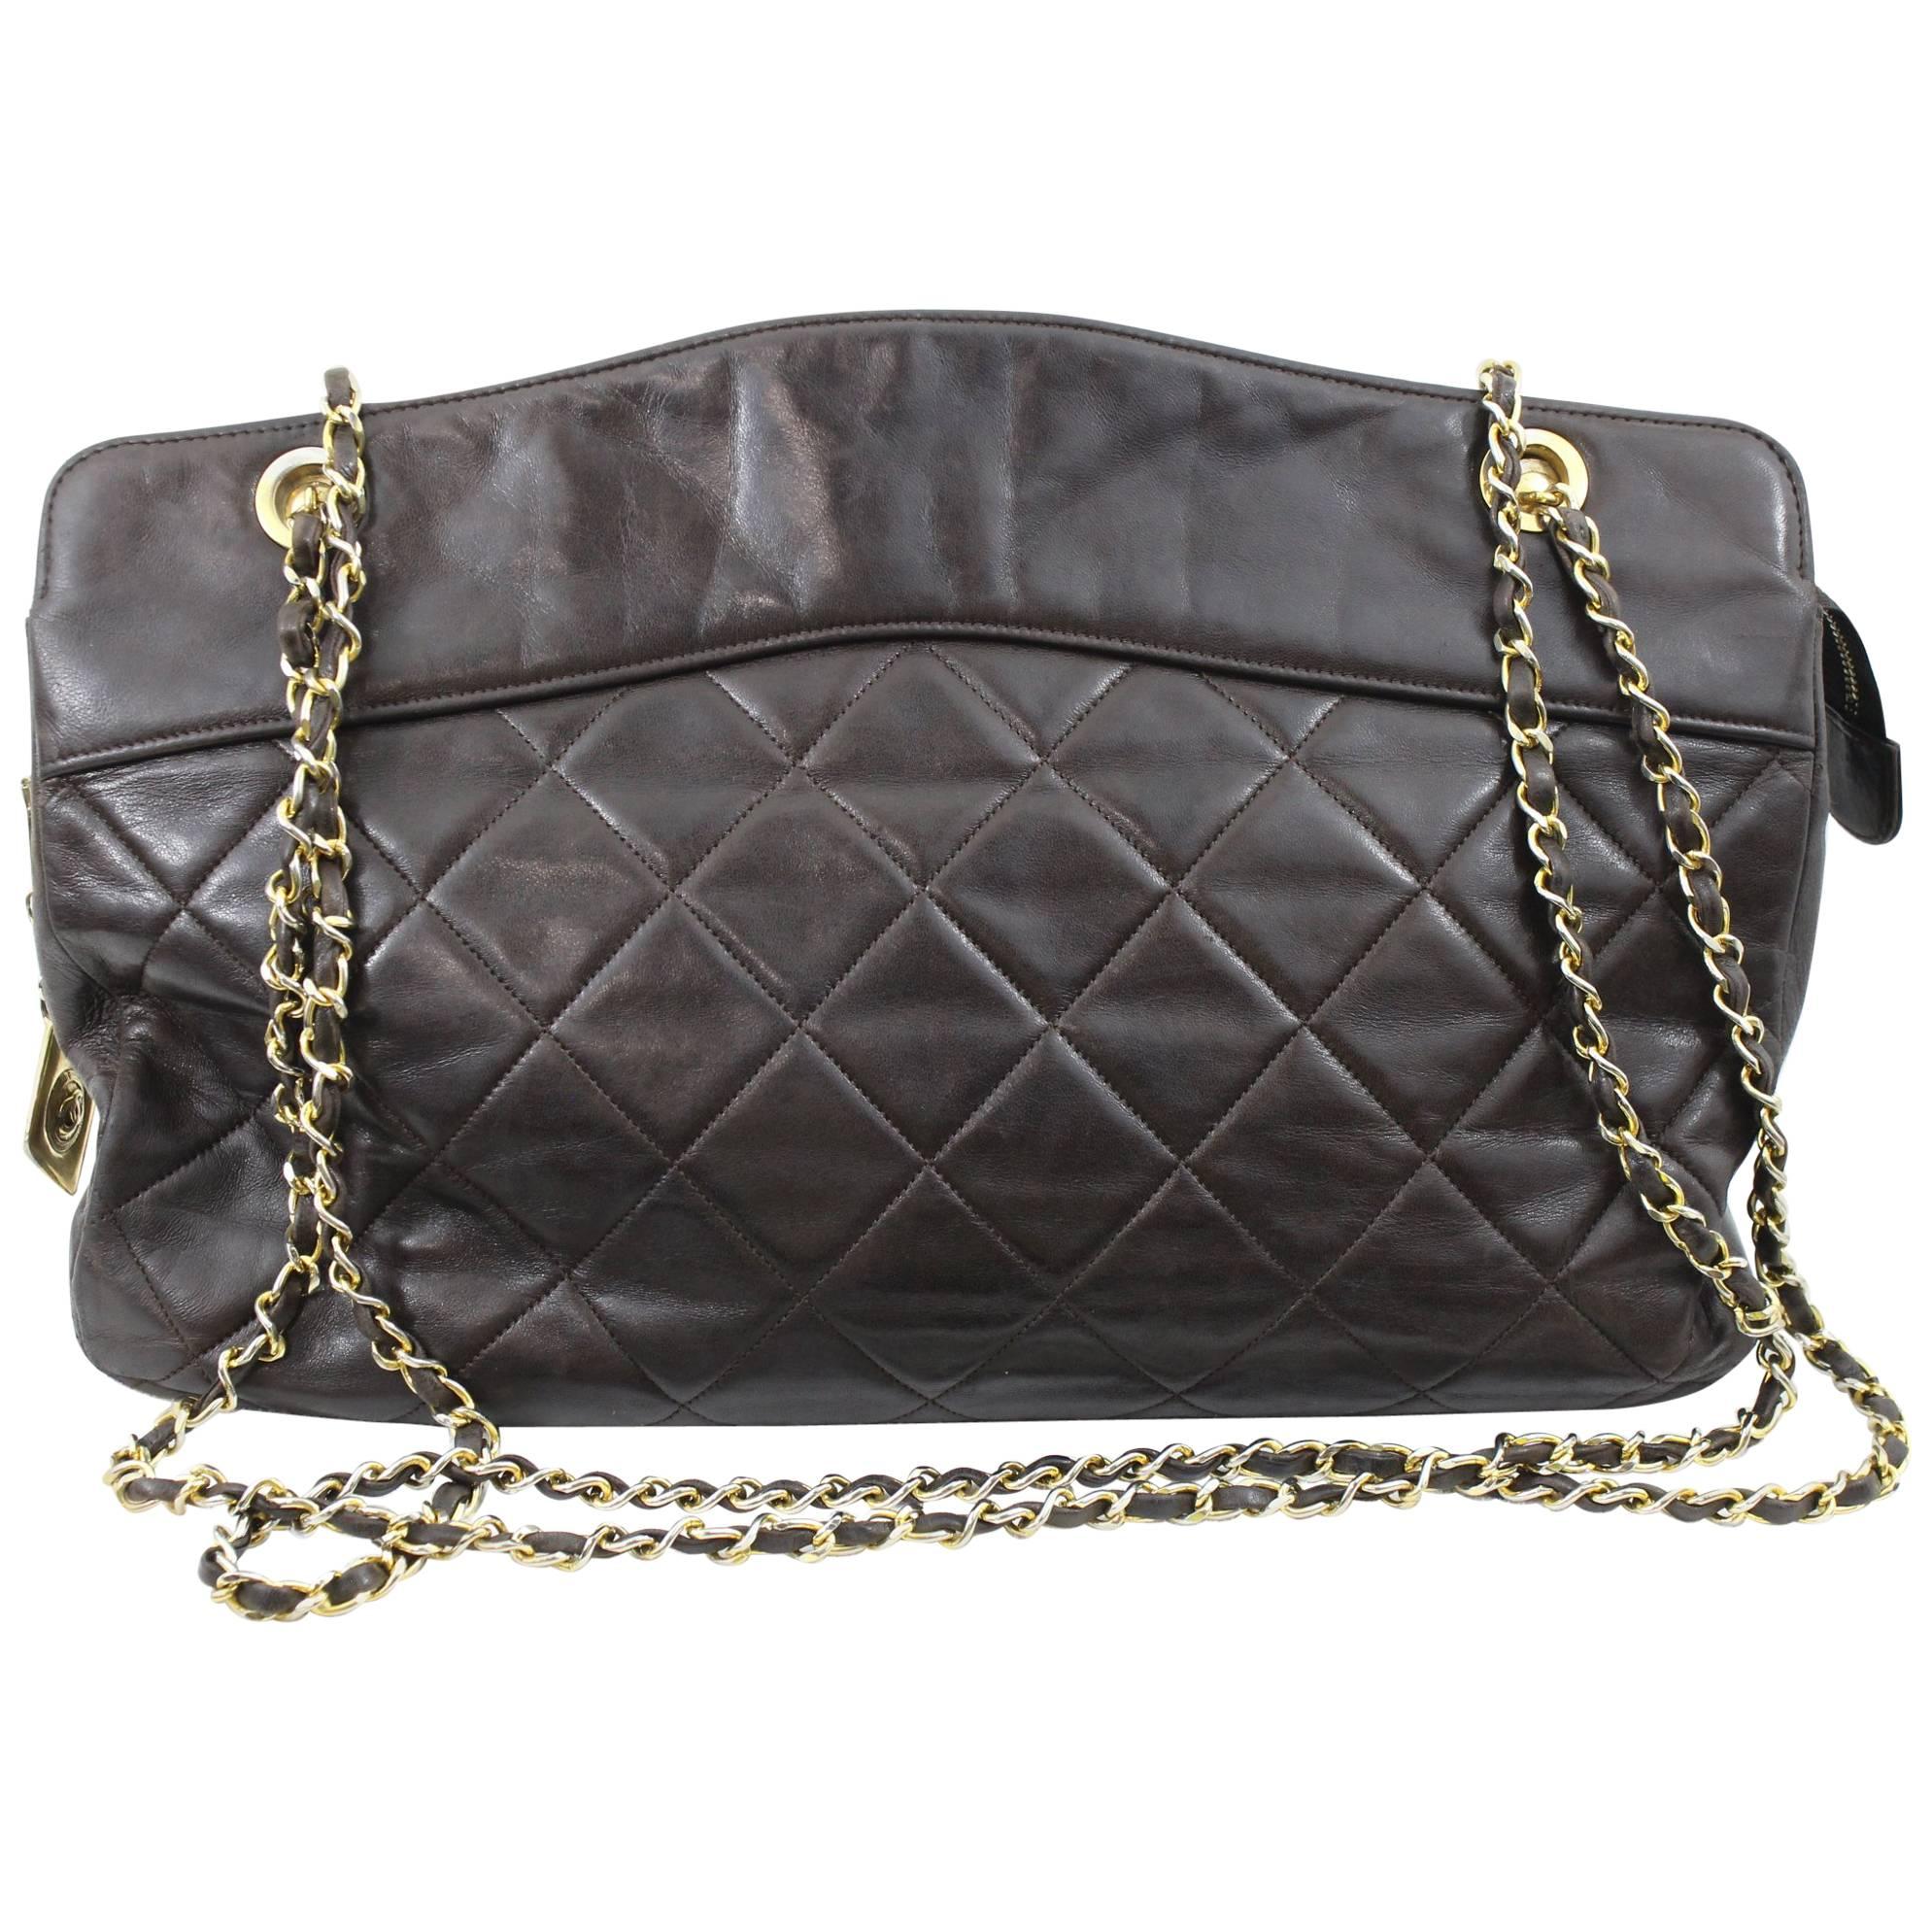 Chanel Large Brown Chocolate Quilted Leather Shopping Bag